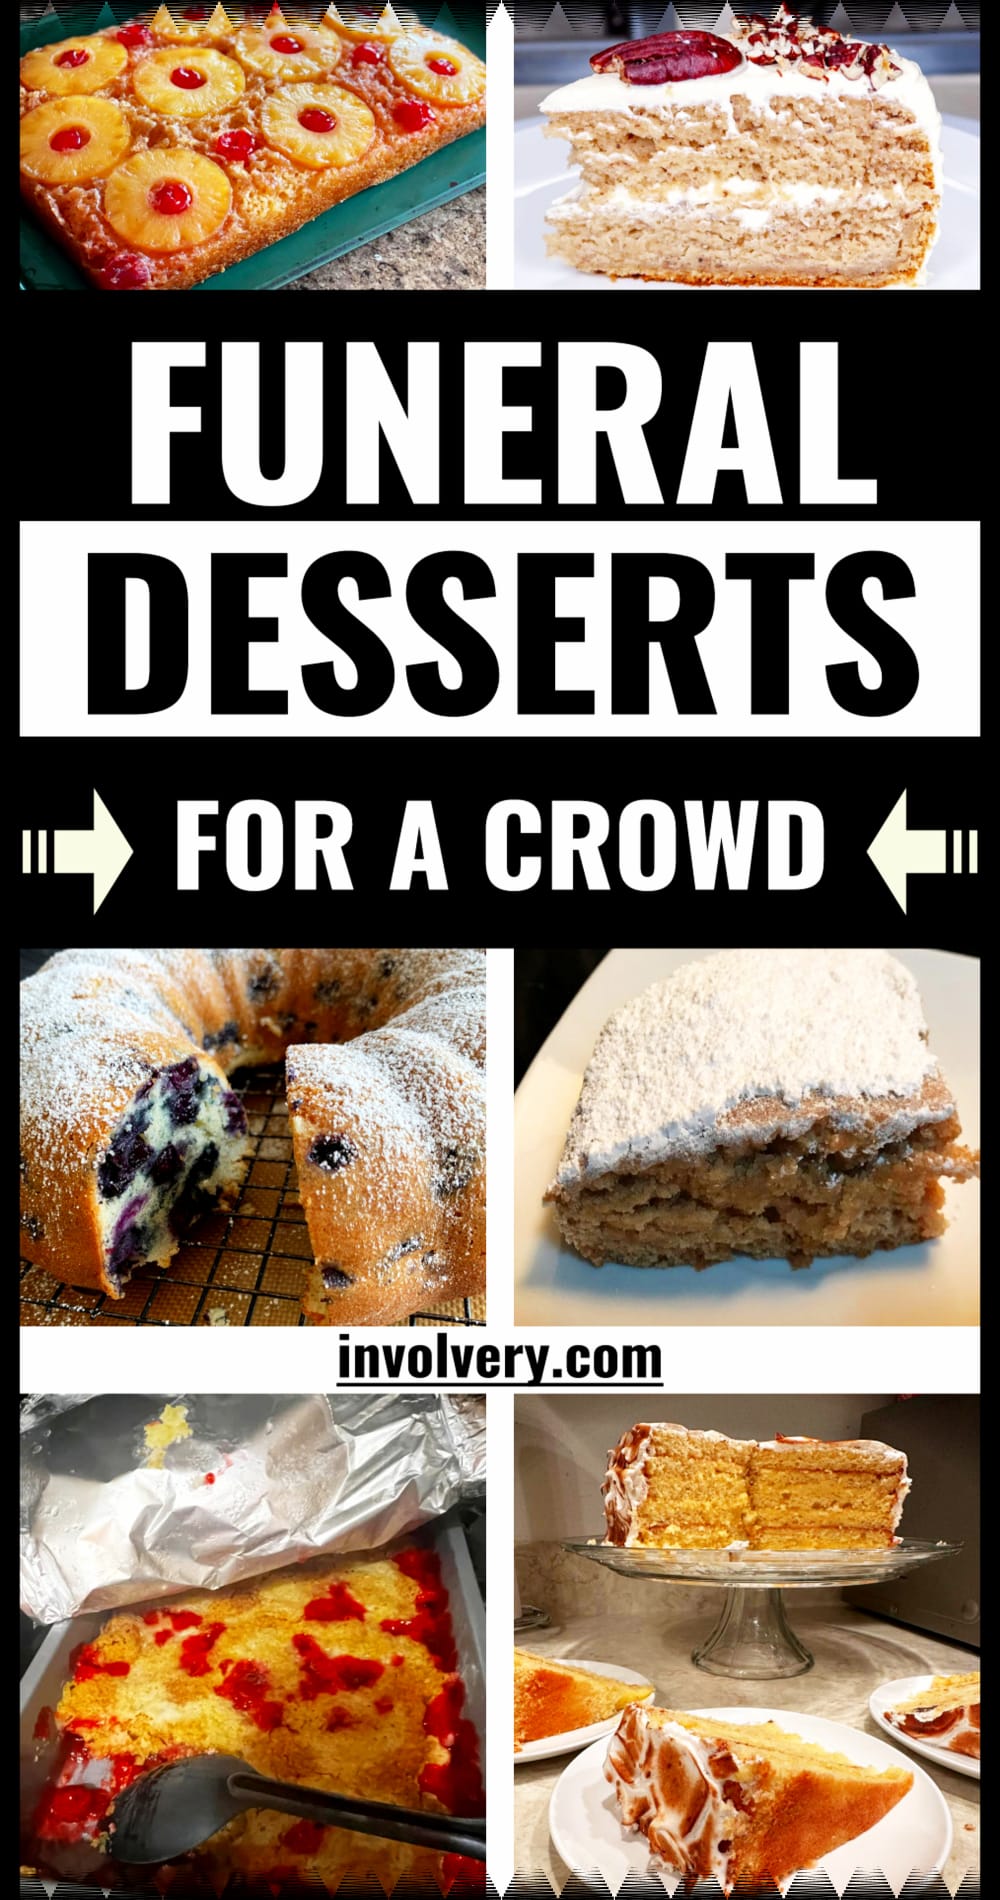 funeral desserts for a crowd - 6 example dessert recipes